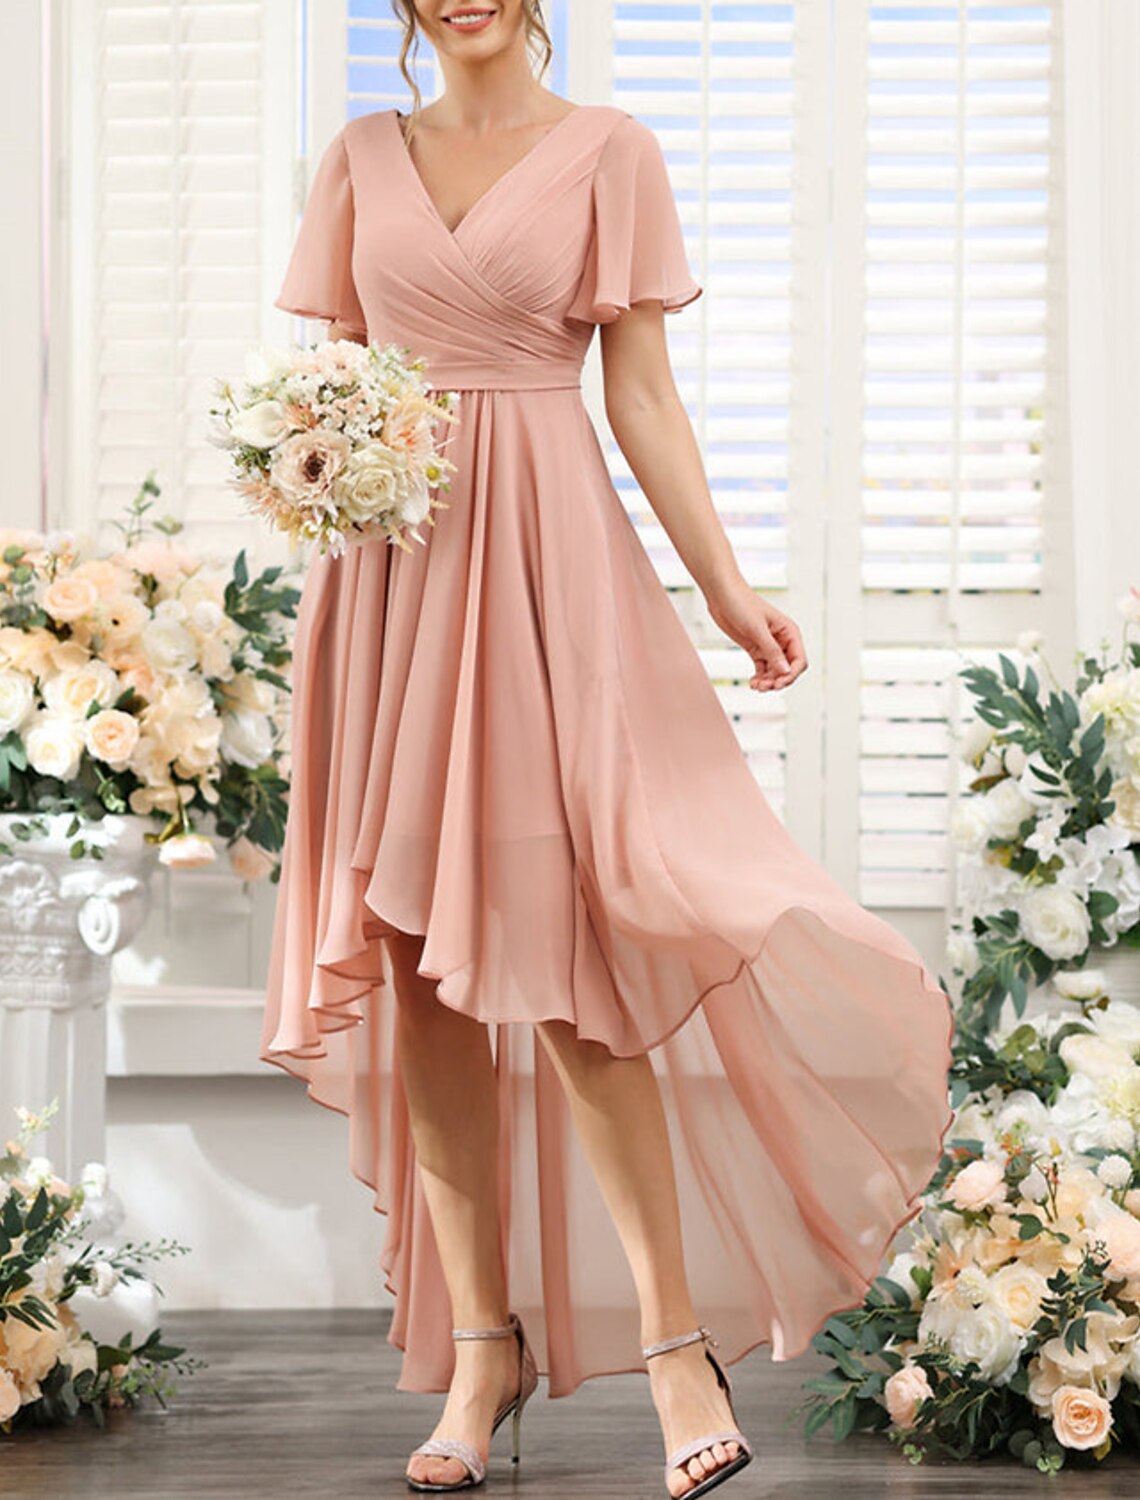 A-Line Bridesmaid Dress V Neck Short Sleeve Pink Asymmetrical Chiffon with Ruching / Solid Color